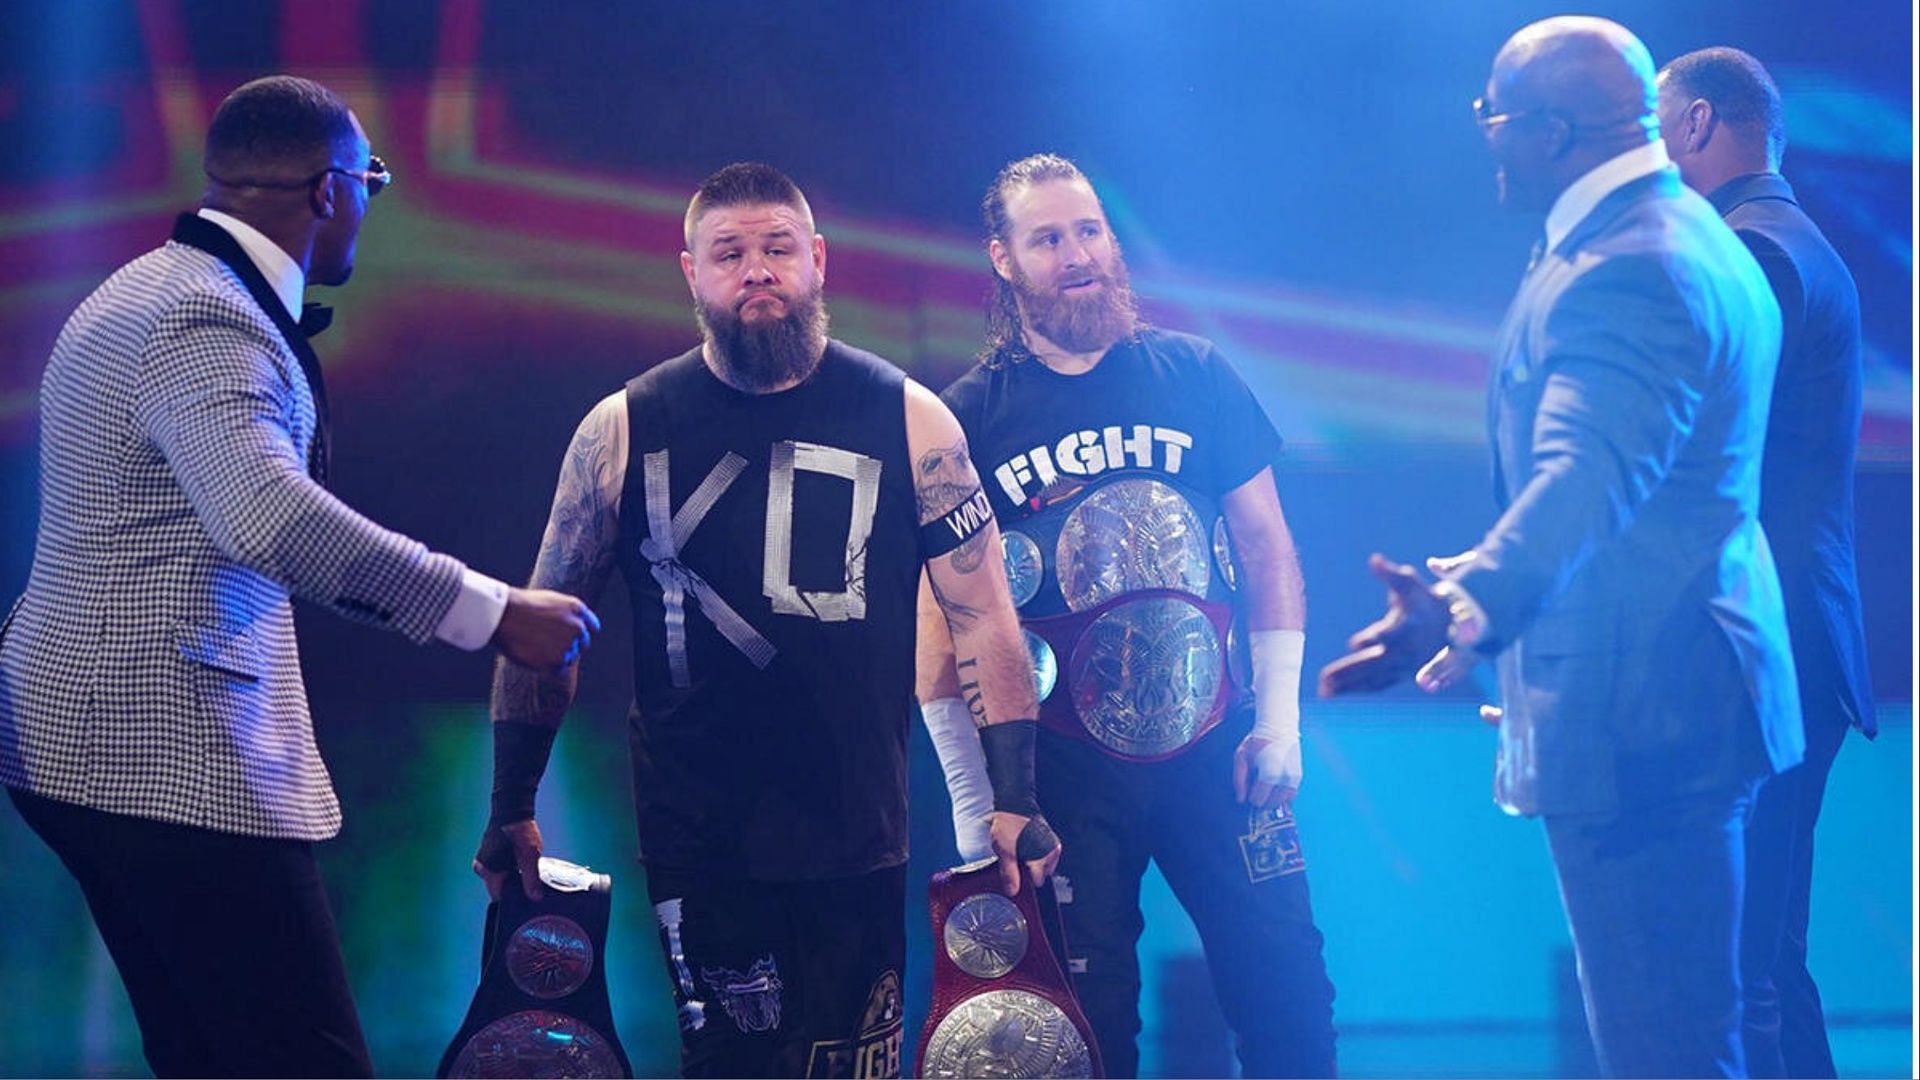 Kevin Owens and Sami Zayn make their entrance on WWE SmackDown.